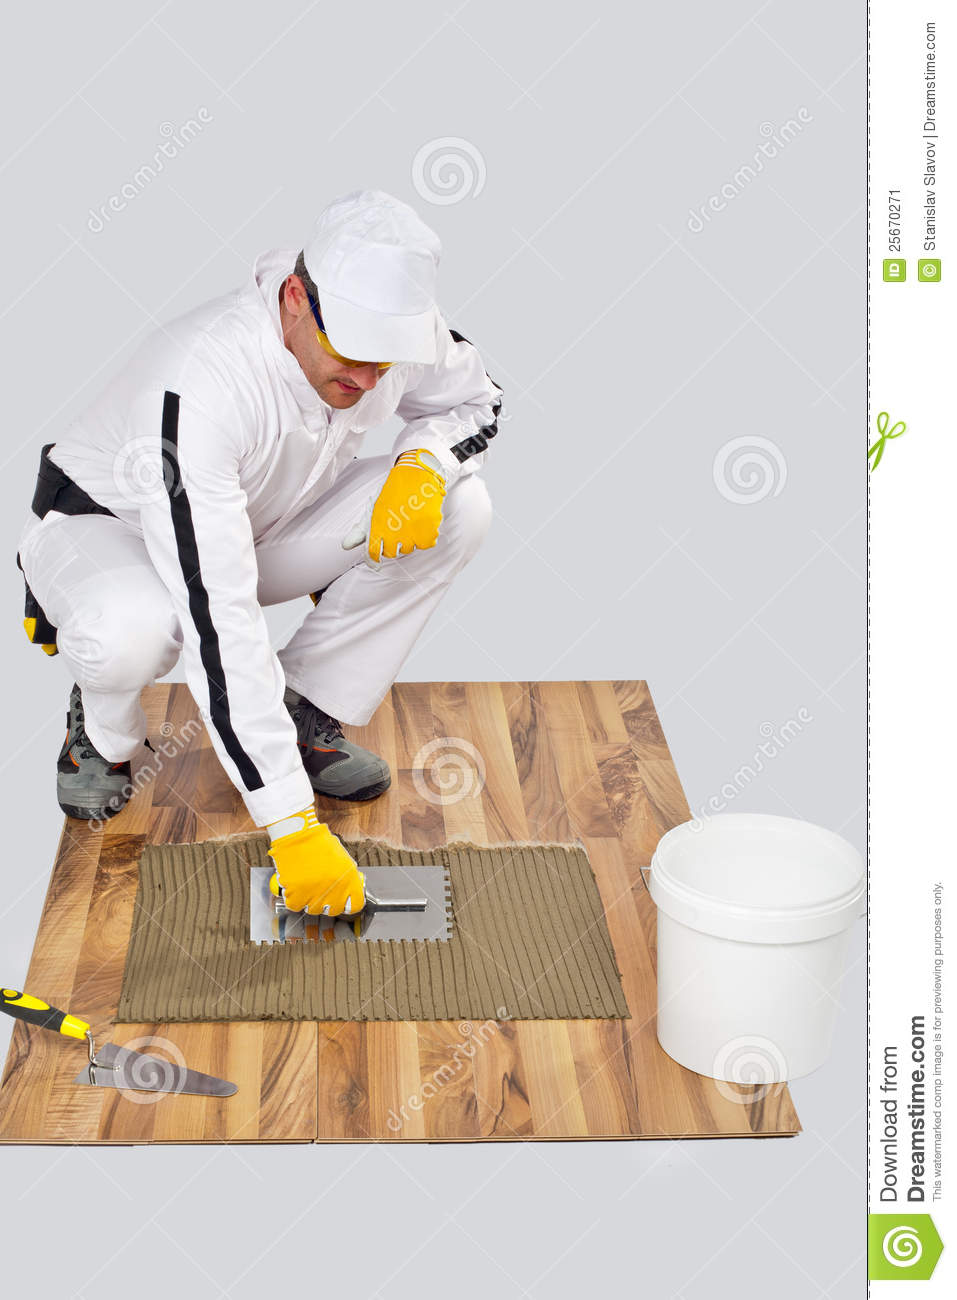 Construction Worker In White Coveralls Applying Tile Adhesive With